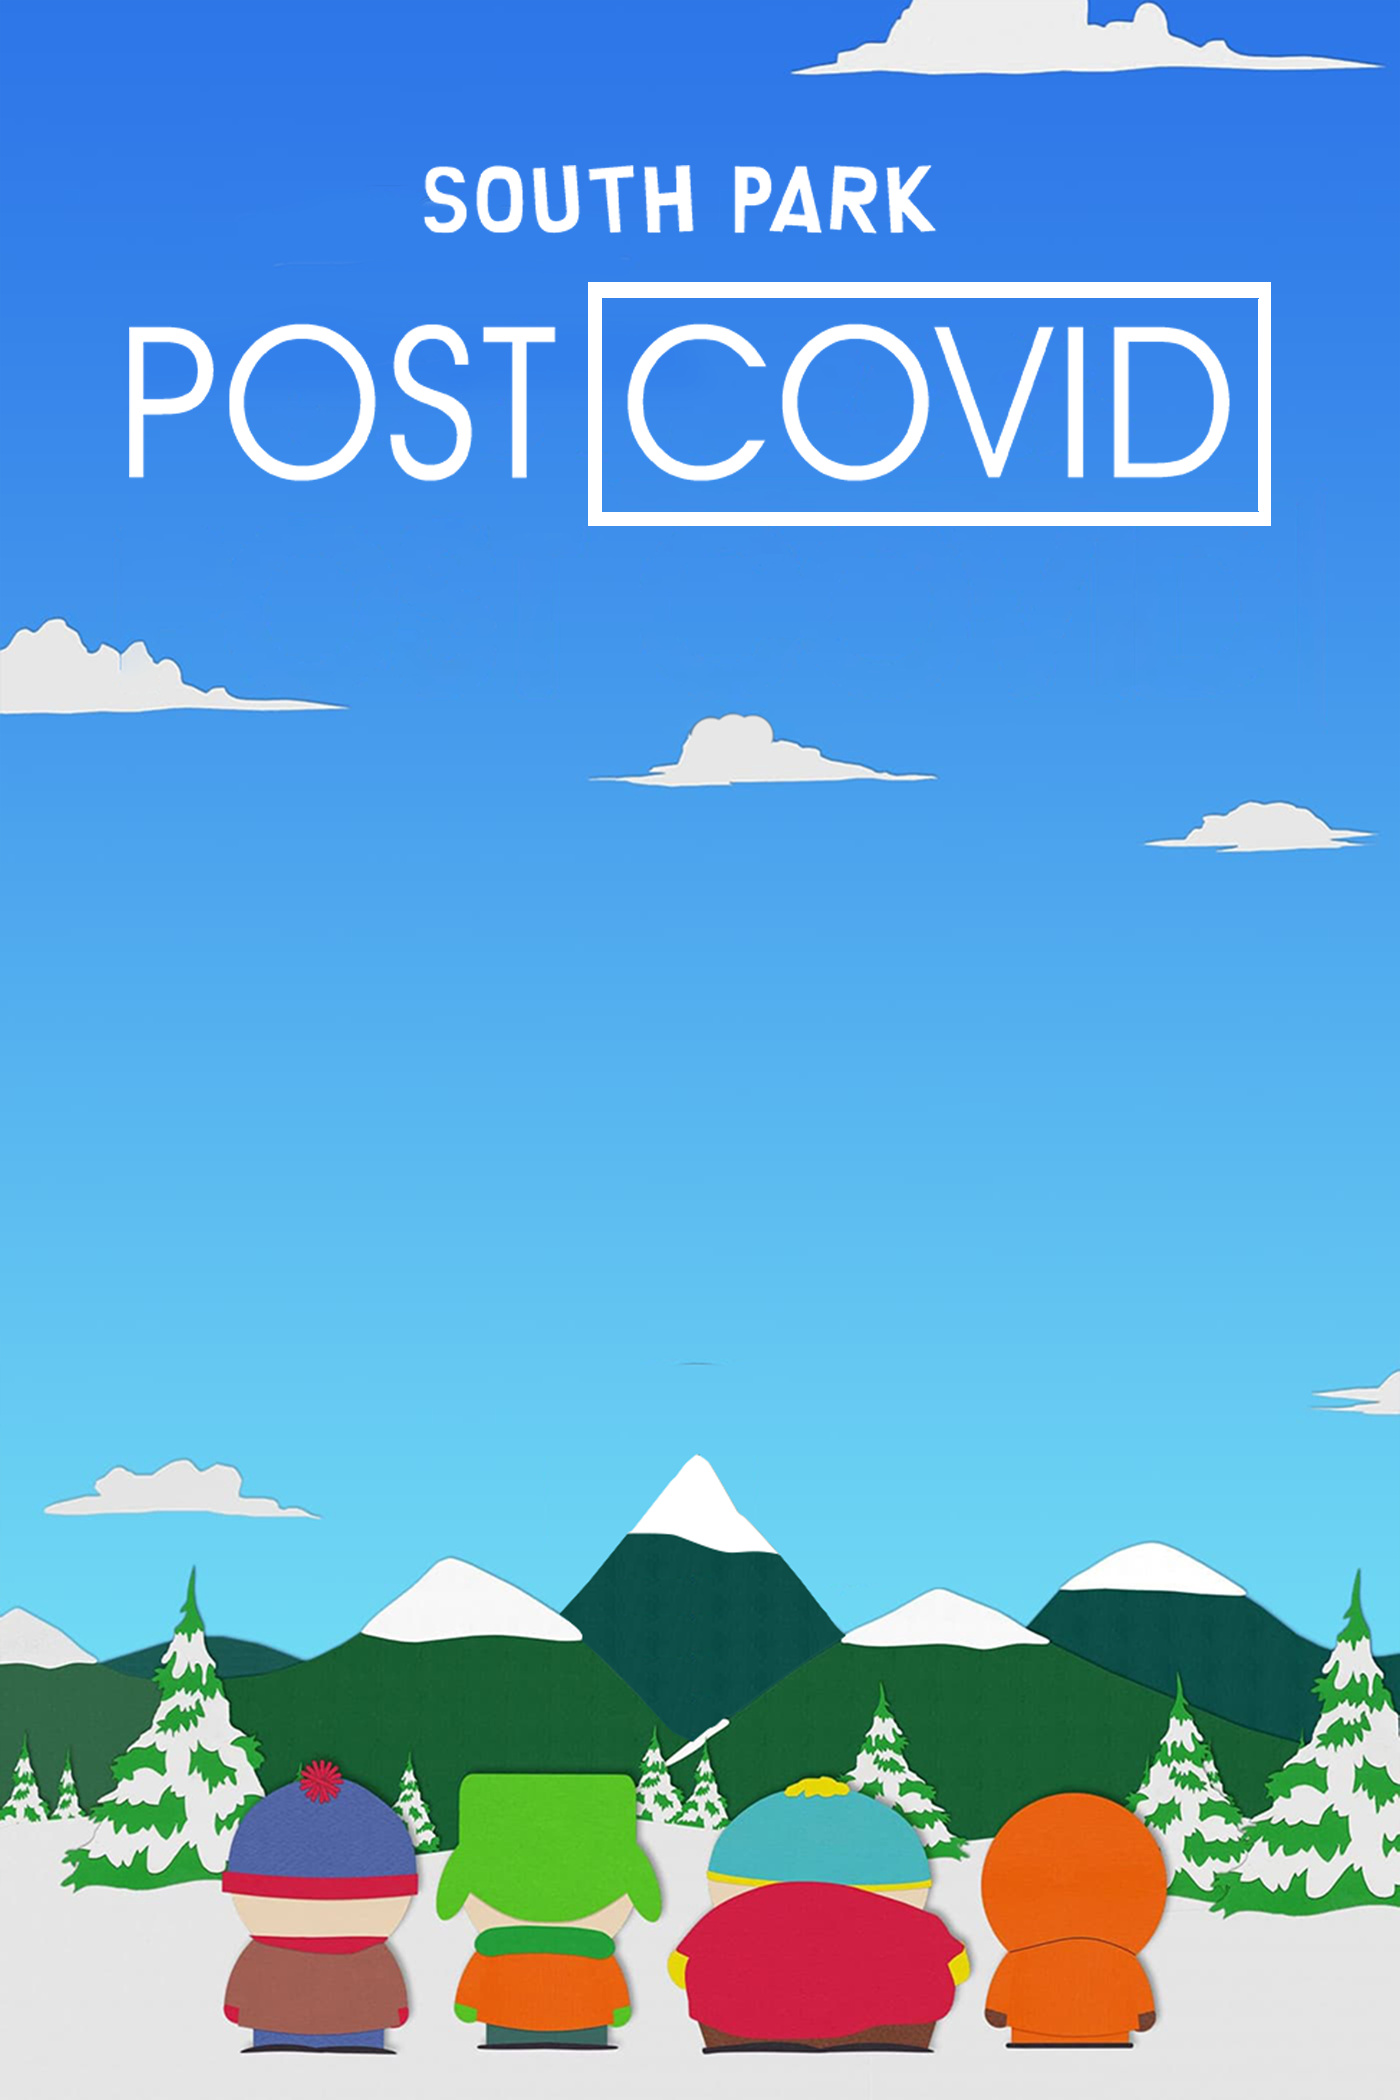 South Park Post COVID, Return of COVID, Red & white logos, Rplexposters, 1400x2100 HD Handy